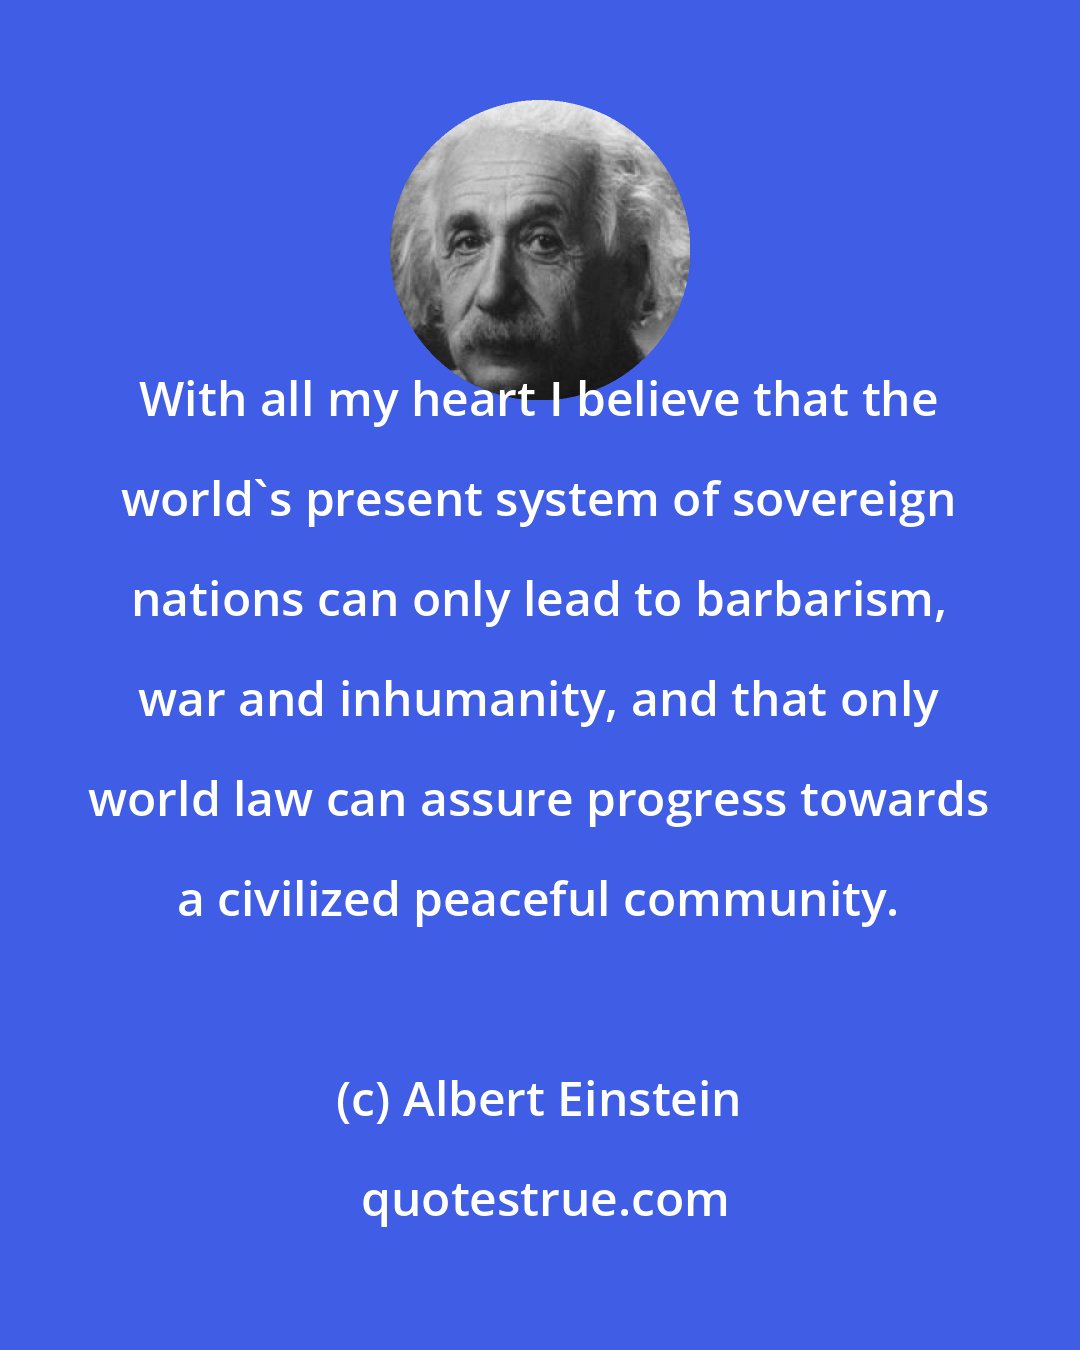 Albert Einstein: With all my heart I believe that the world's present system of sovereign nations can only lead to barbarism, war and inhumanity, and that only world law can assure progress towards a civilized peaceful community.